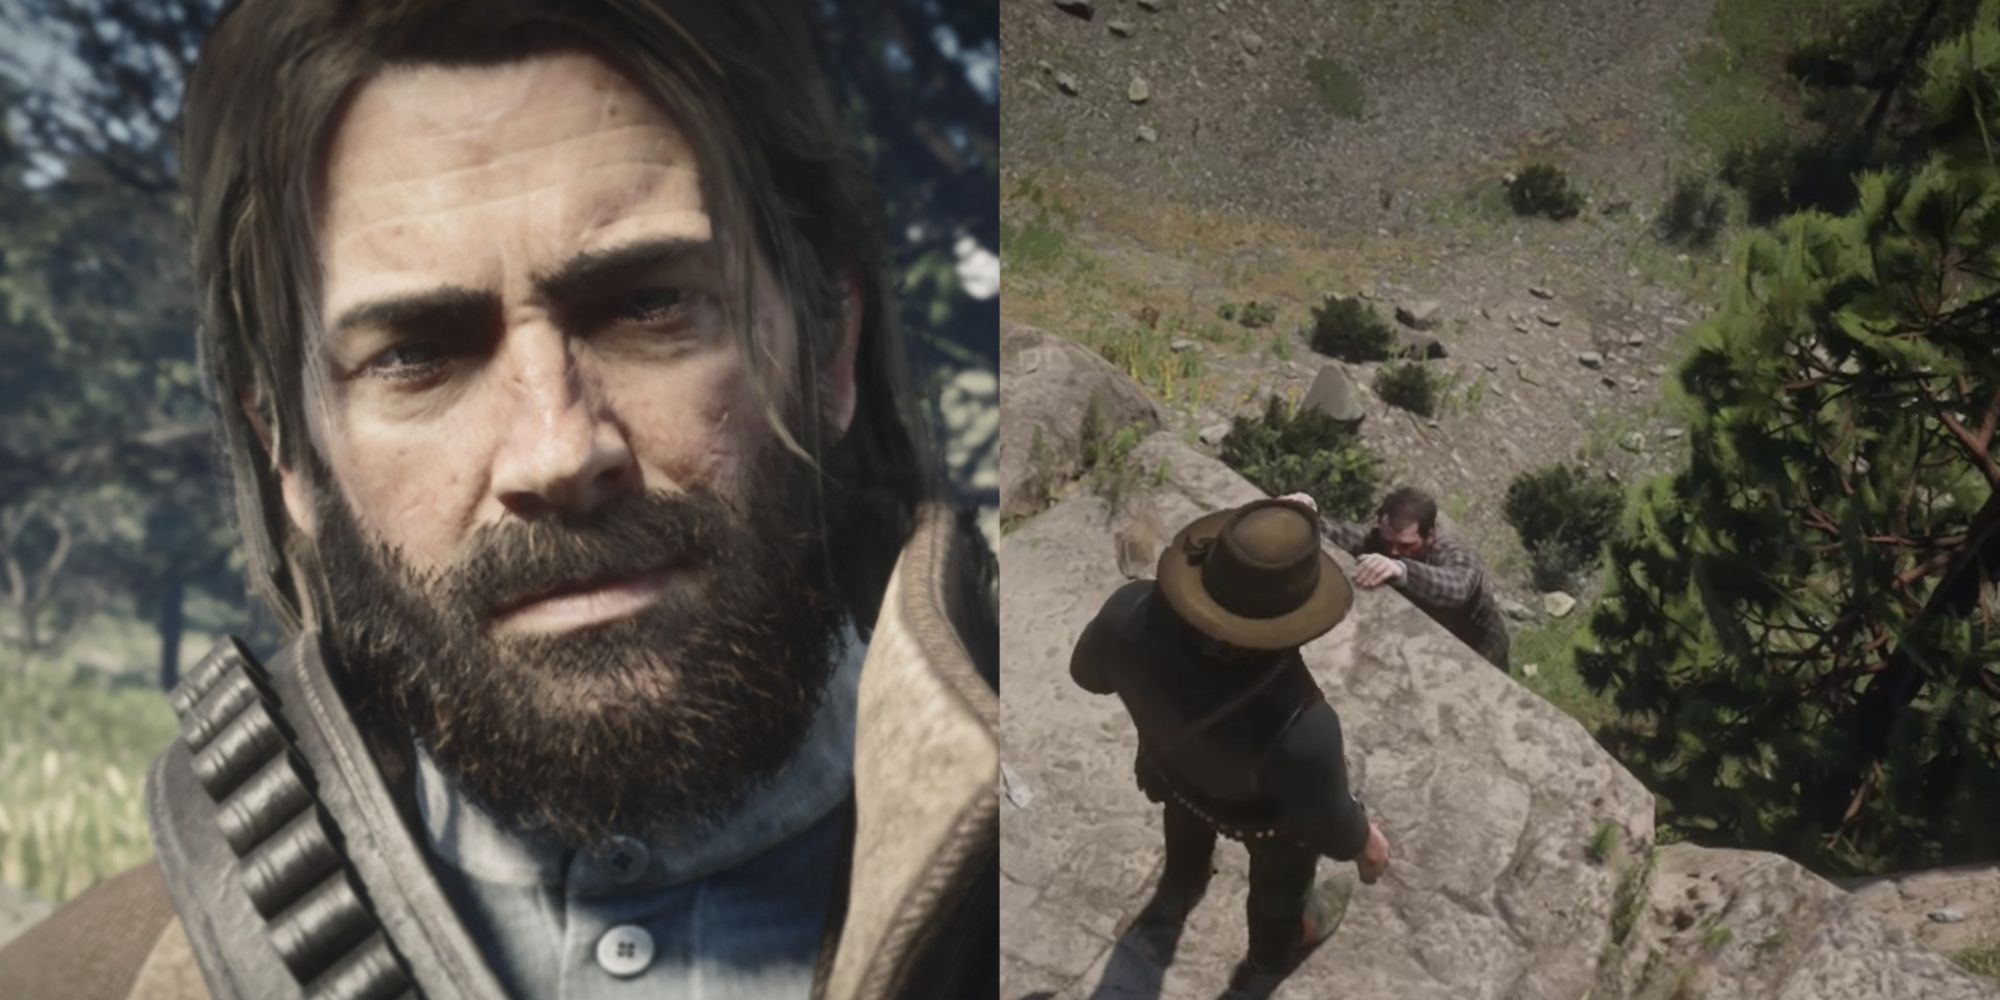 How best to finish the RDR 2 game? The choice of the latter path for Arthur